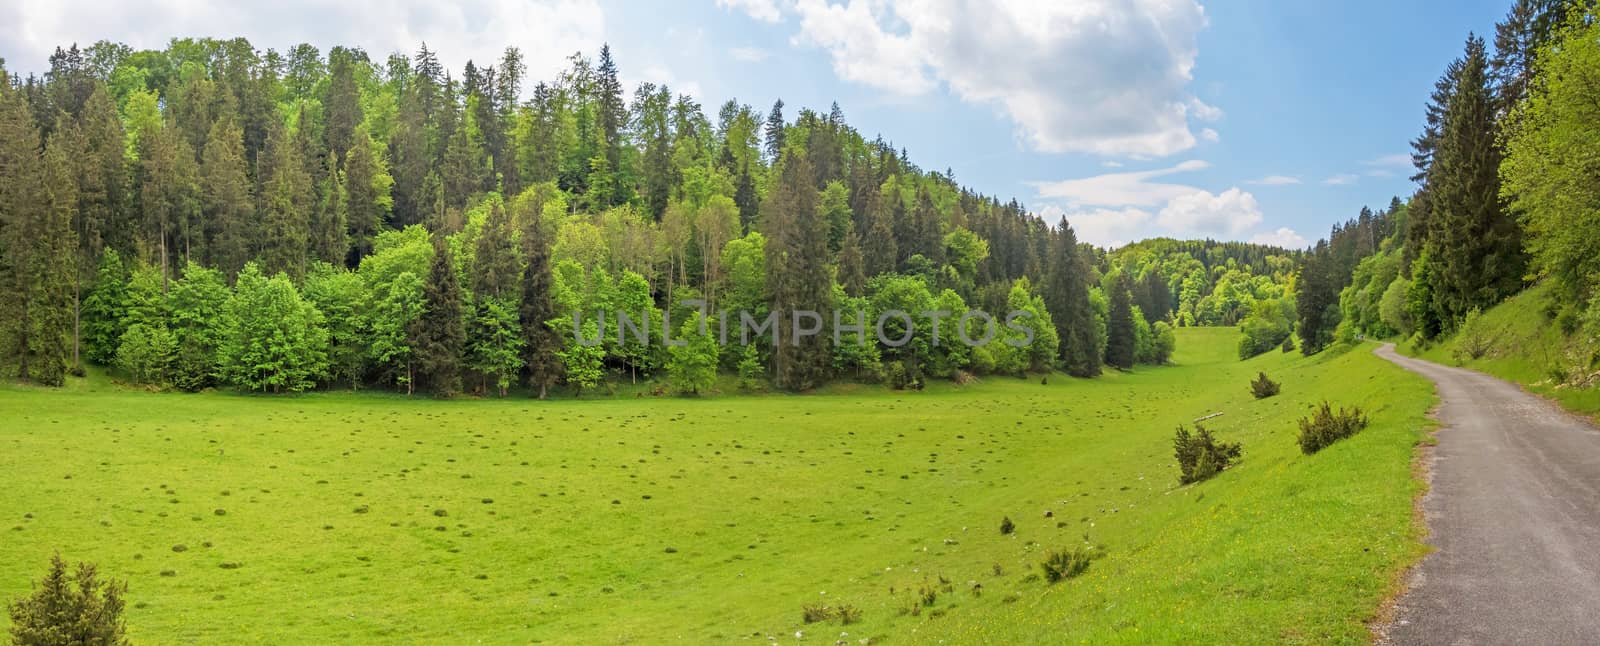 Forest panorama with path / road, meadow in the foreground - Wental valley at Swabian Alps